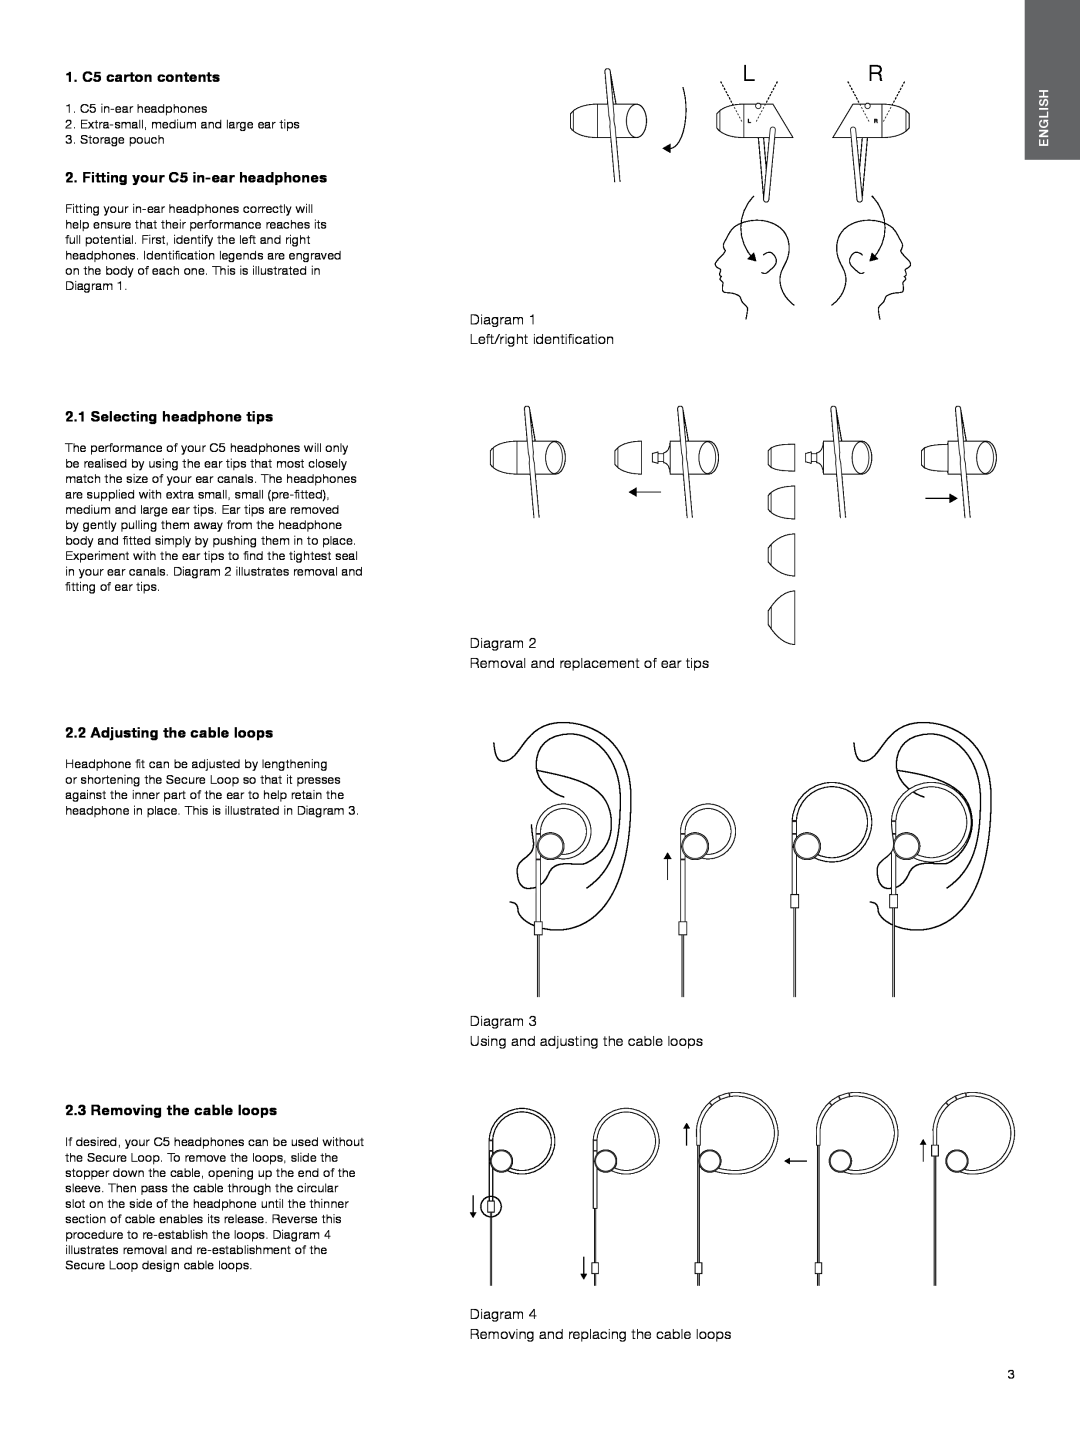 Bowers & Wilkins 1. C5 carton contents, Fitting your C5 in-earheadphones, Diagram Left/right identification, English 